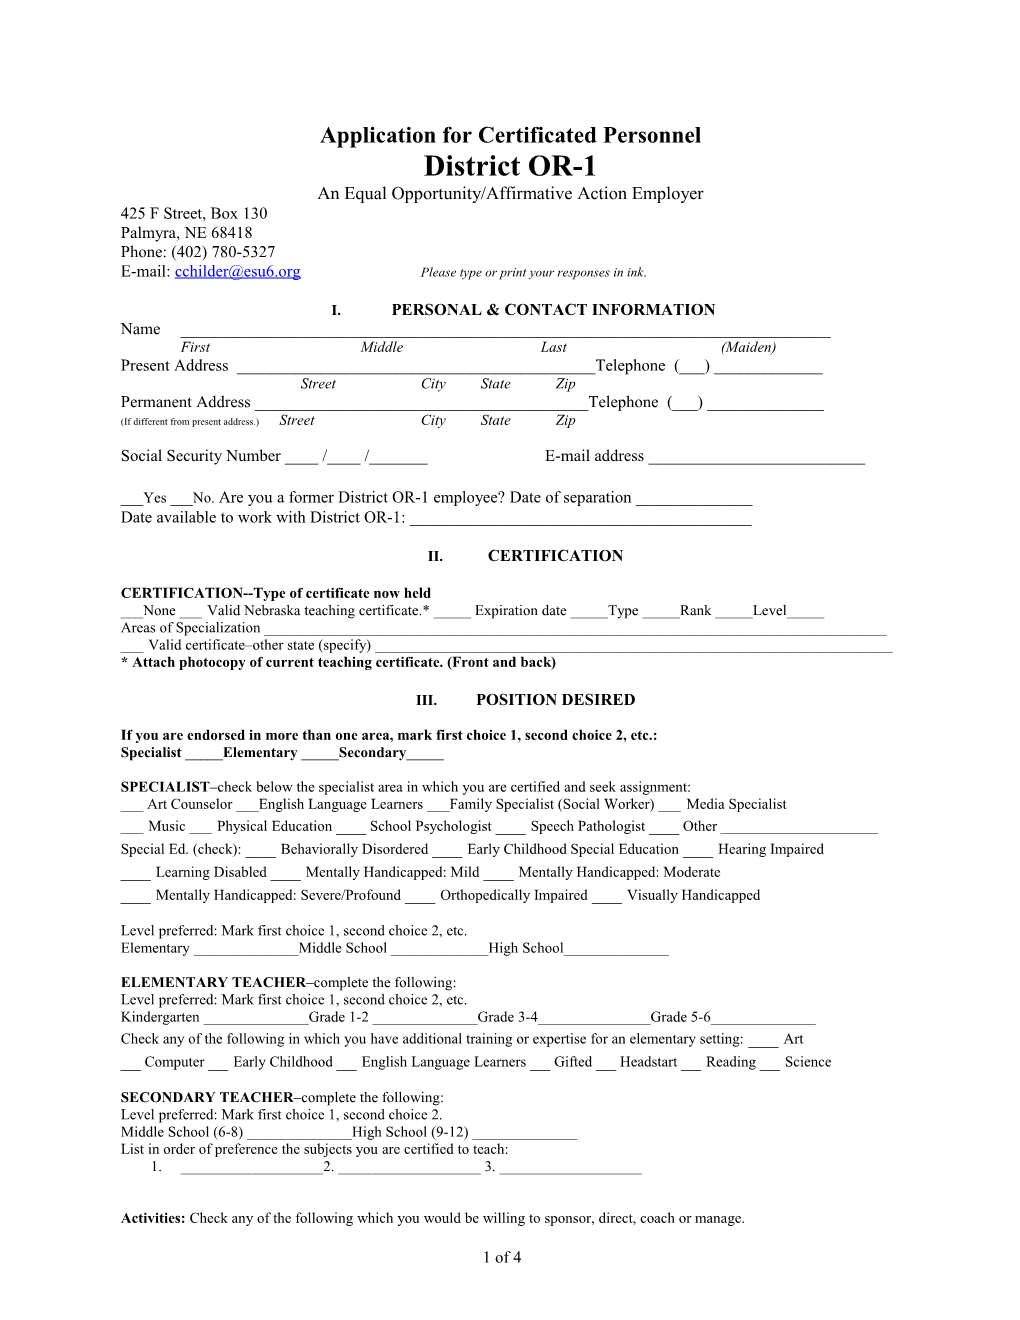 Application for Employment s53